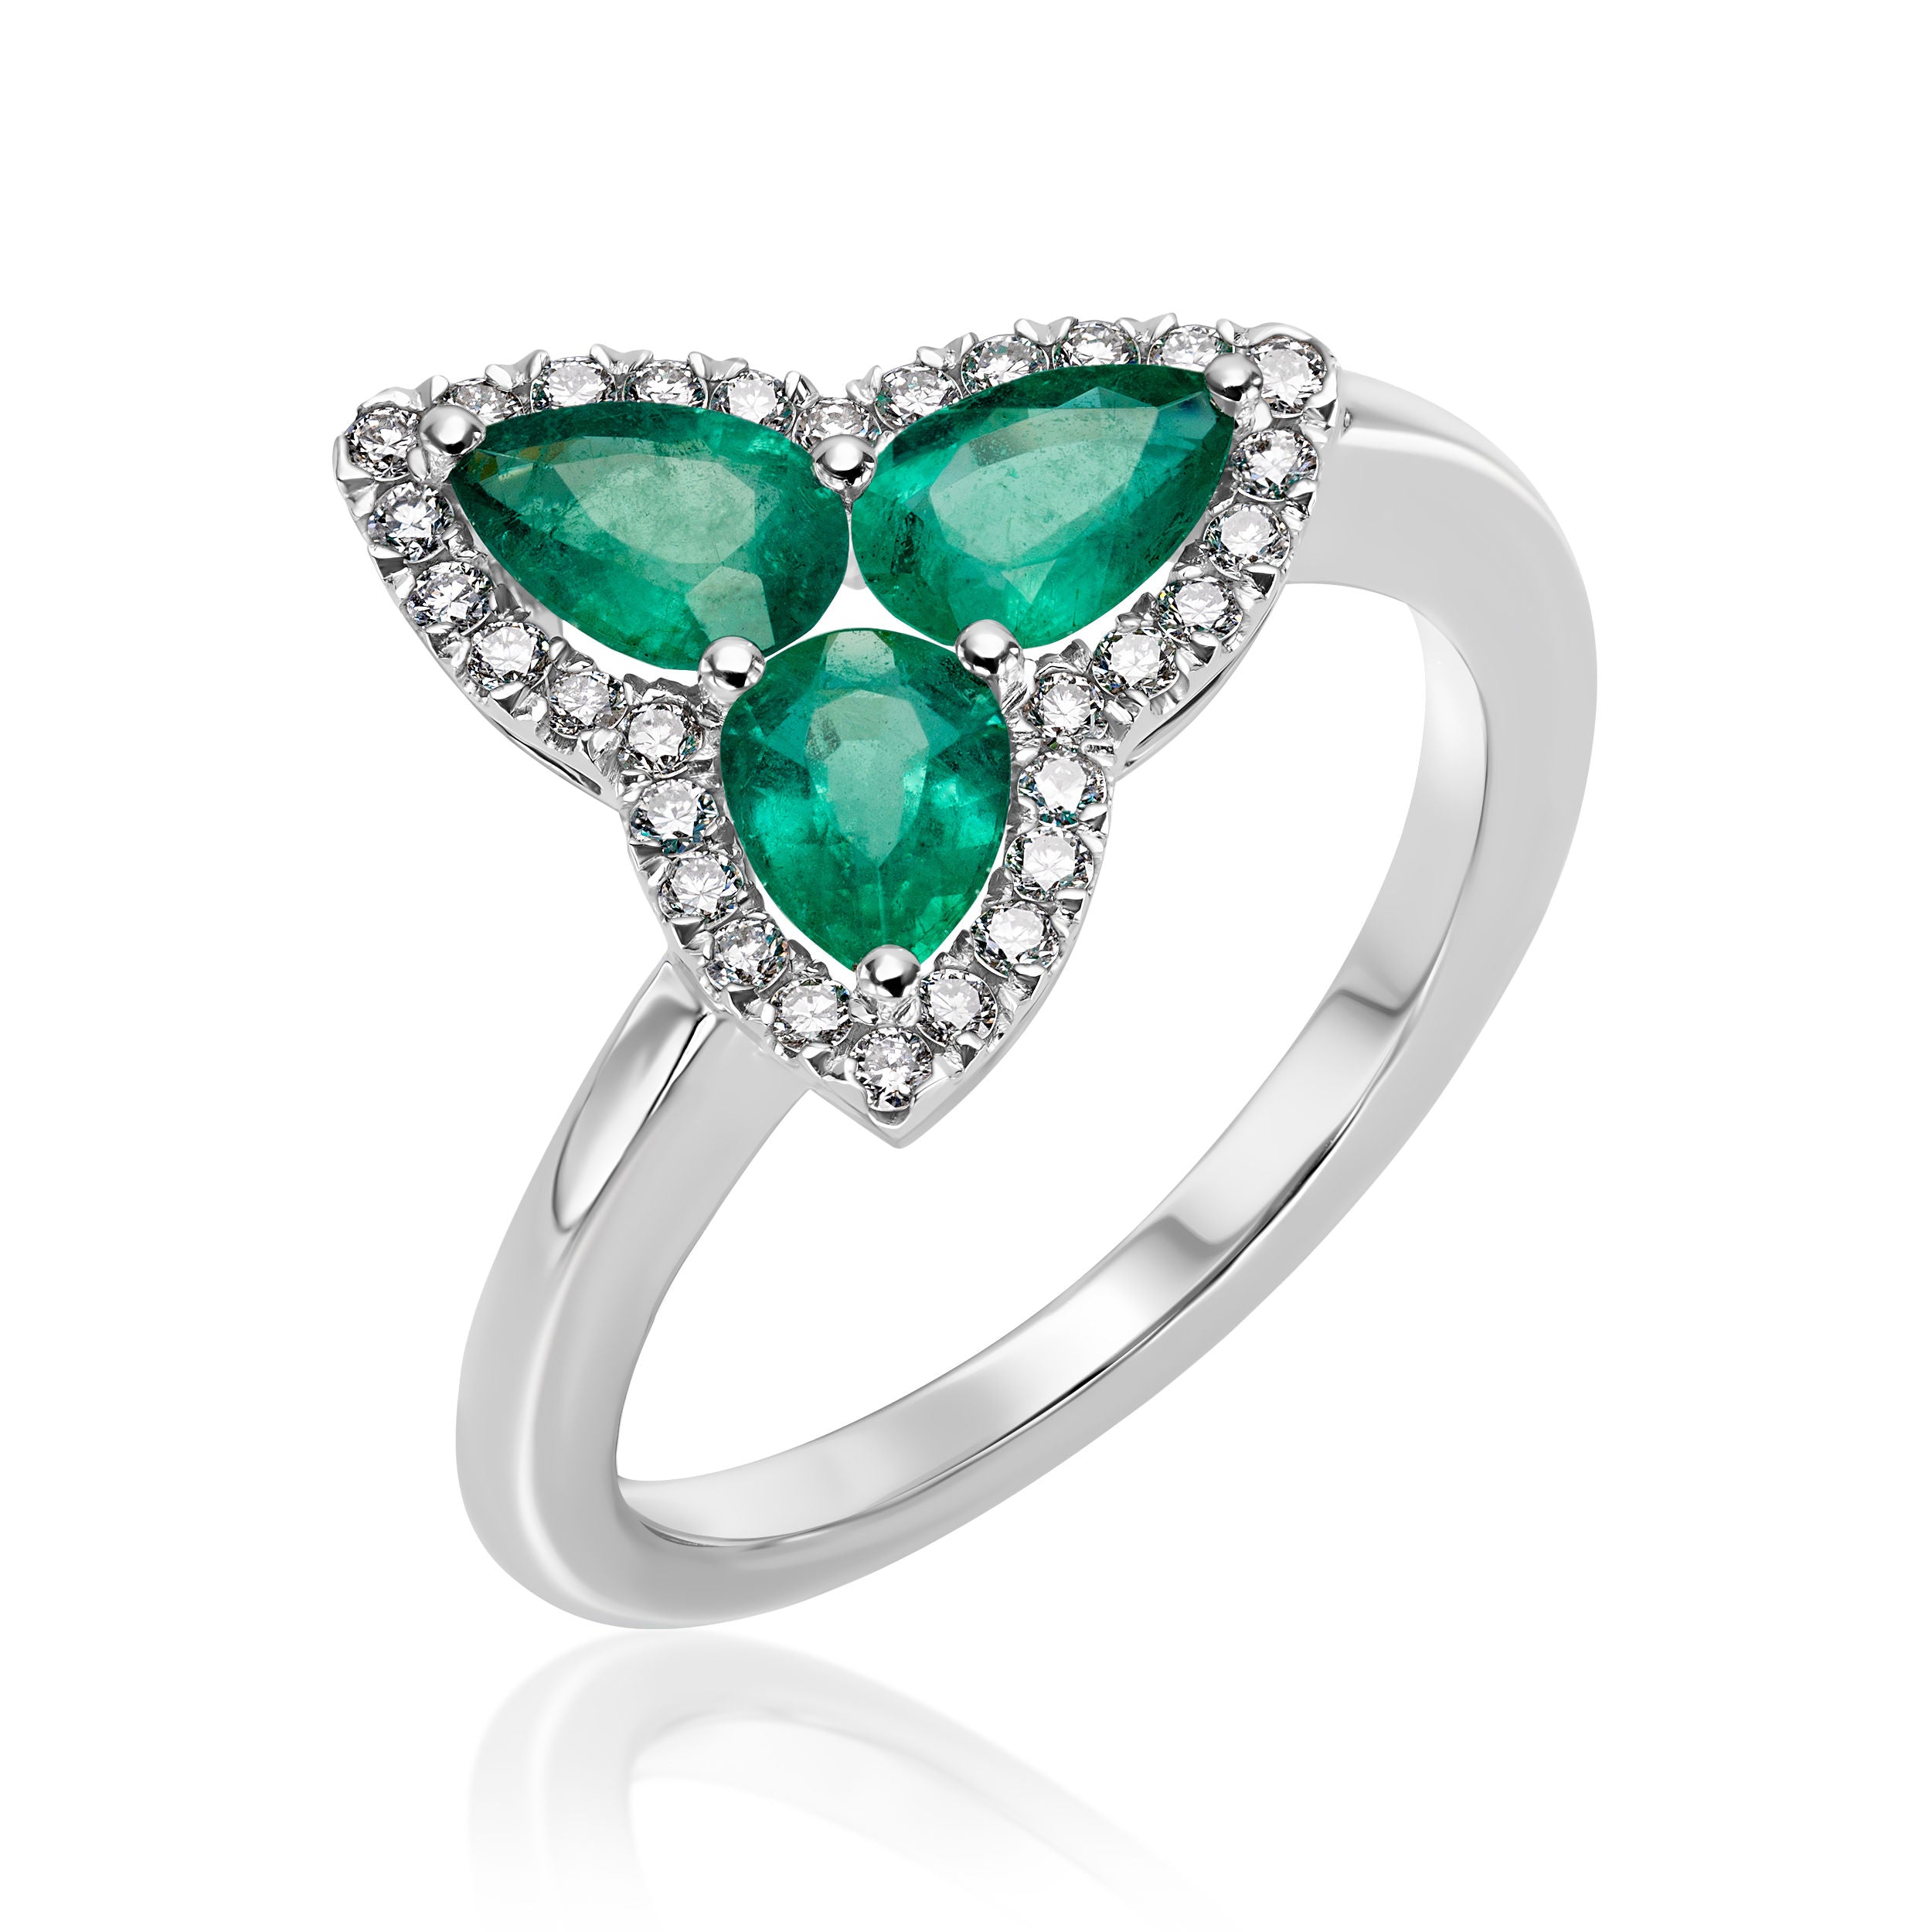 PS Emerald Ring With Diamonds - 1.38ct TW